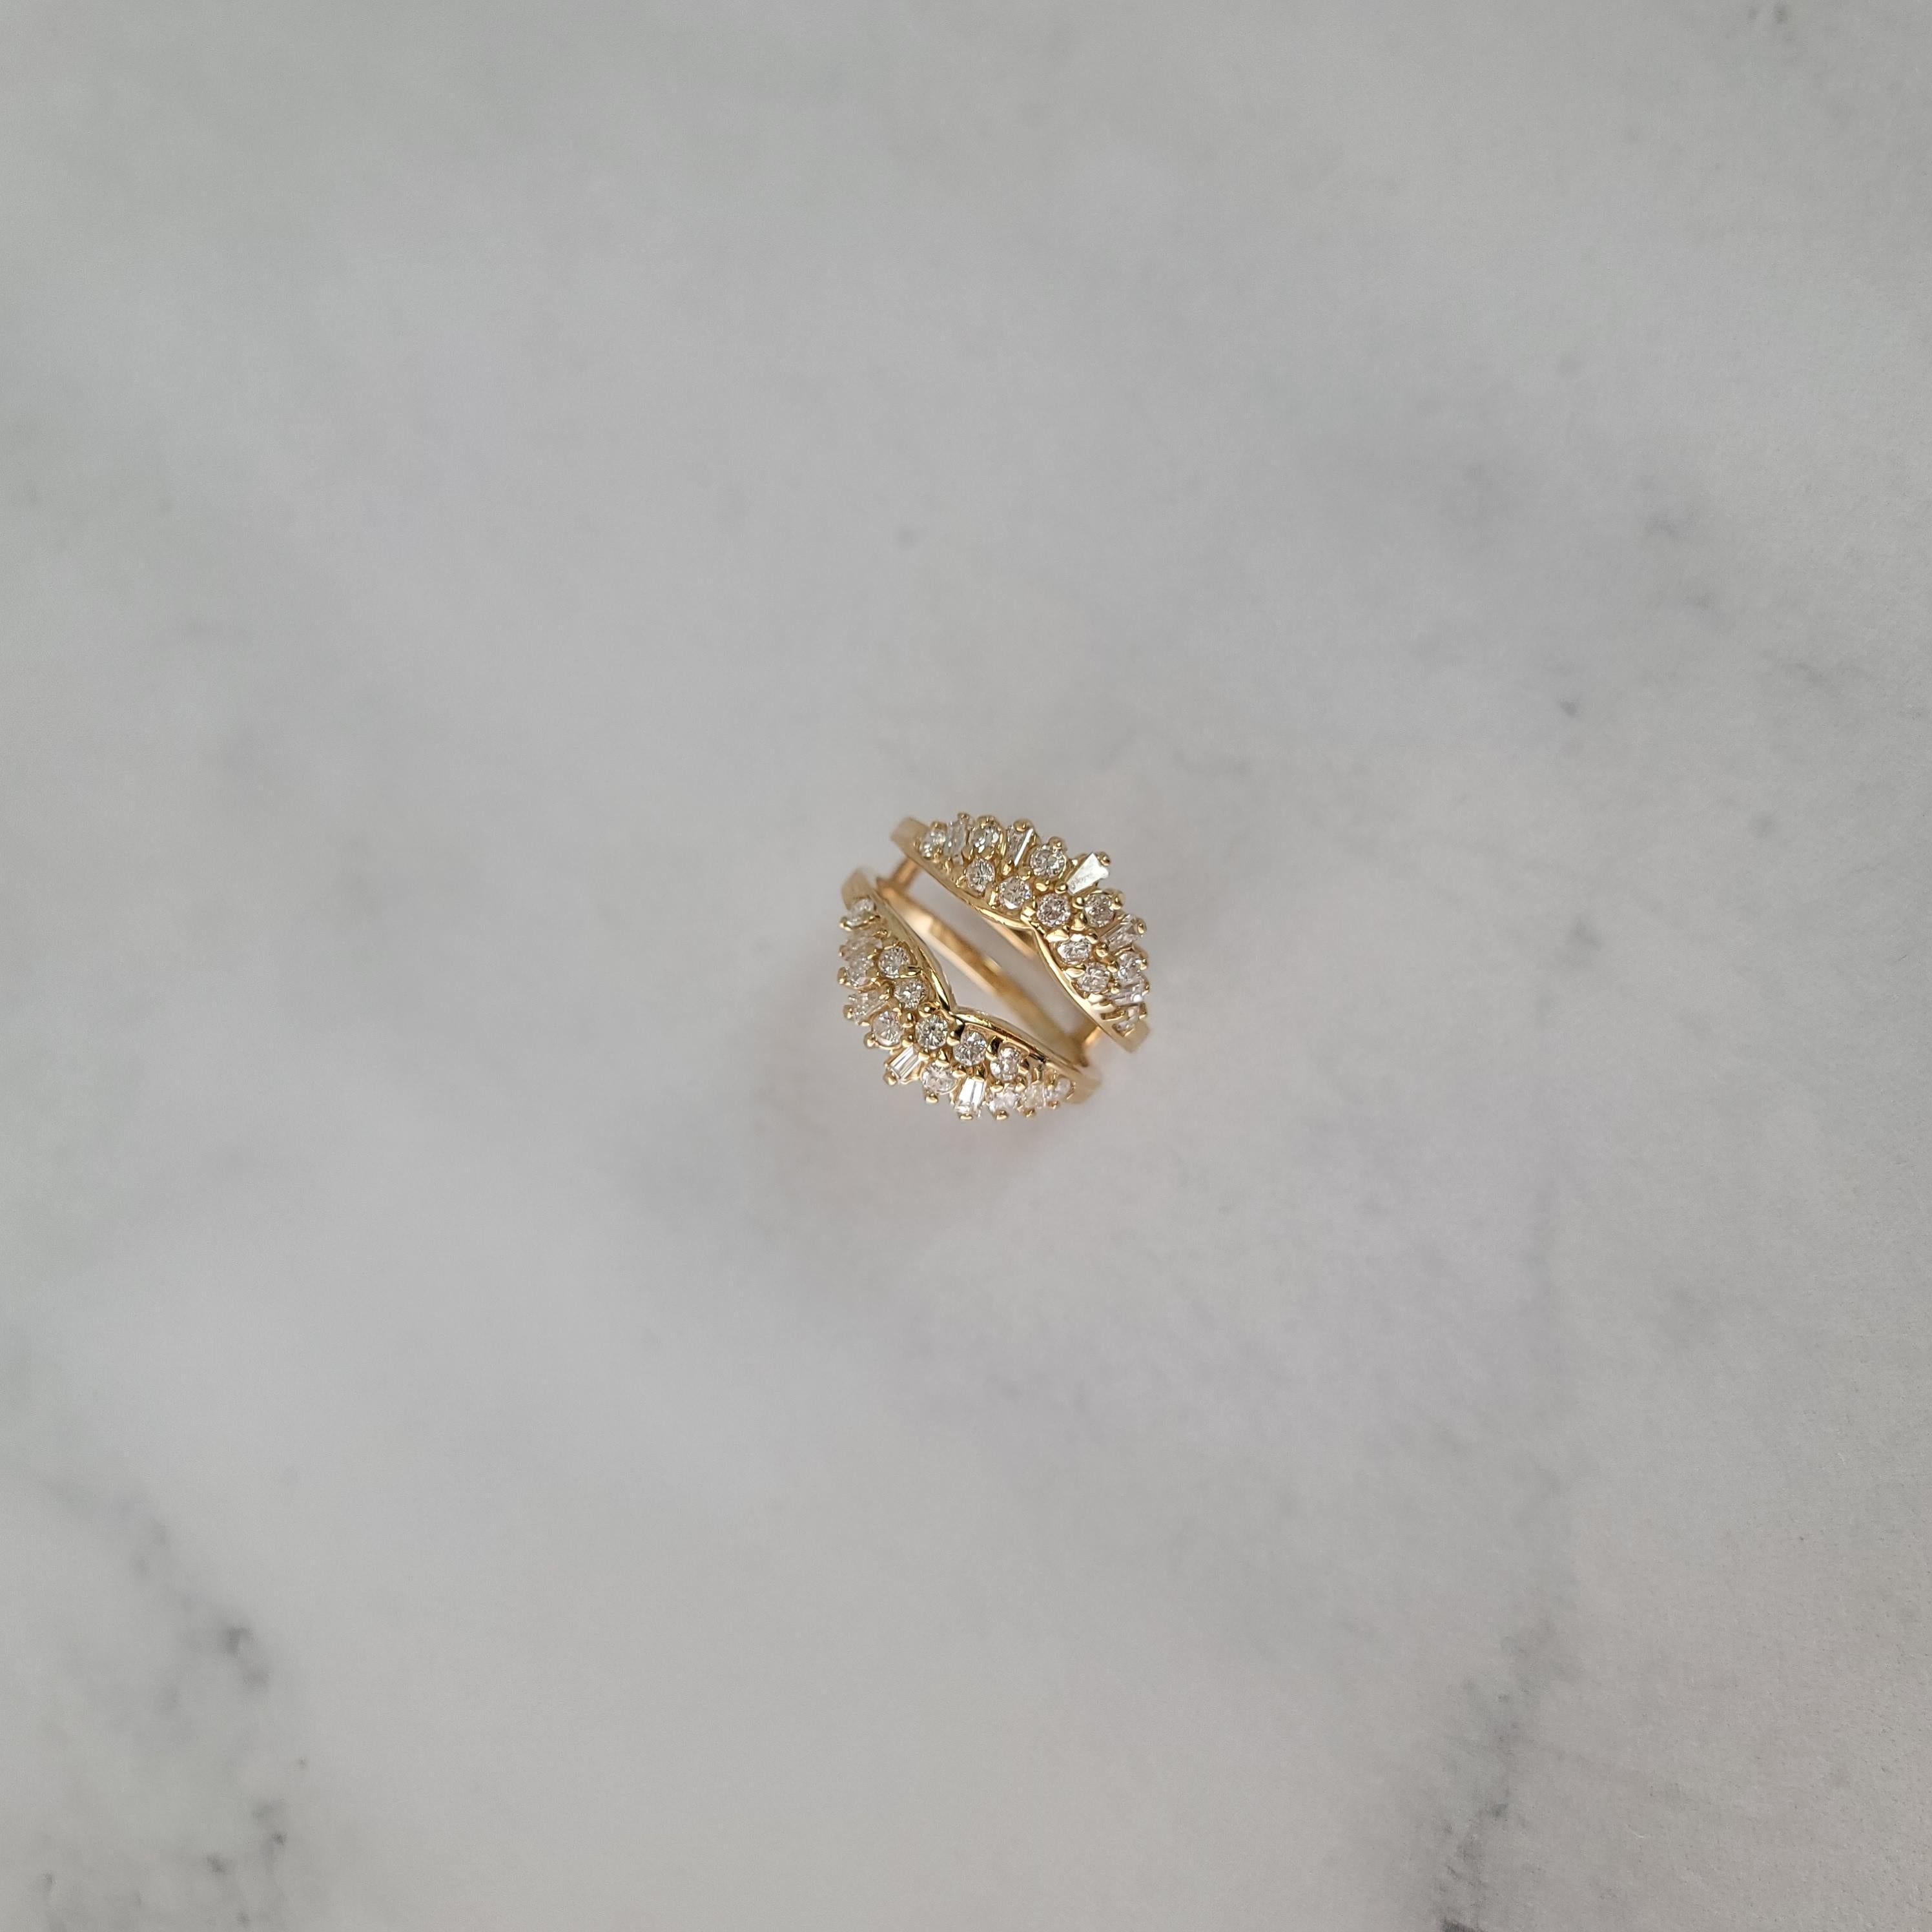 One Carat Baguette Cluster Ring Enhancer In New Condition For Sale In Sugar Land, TX